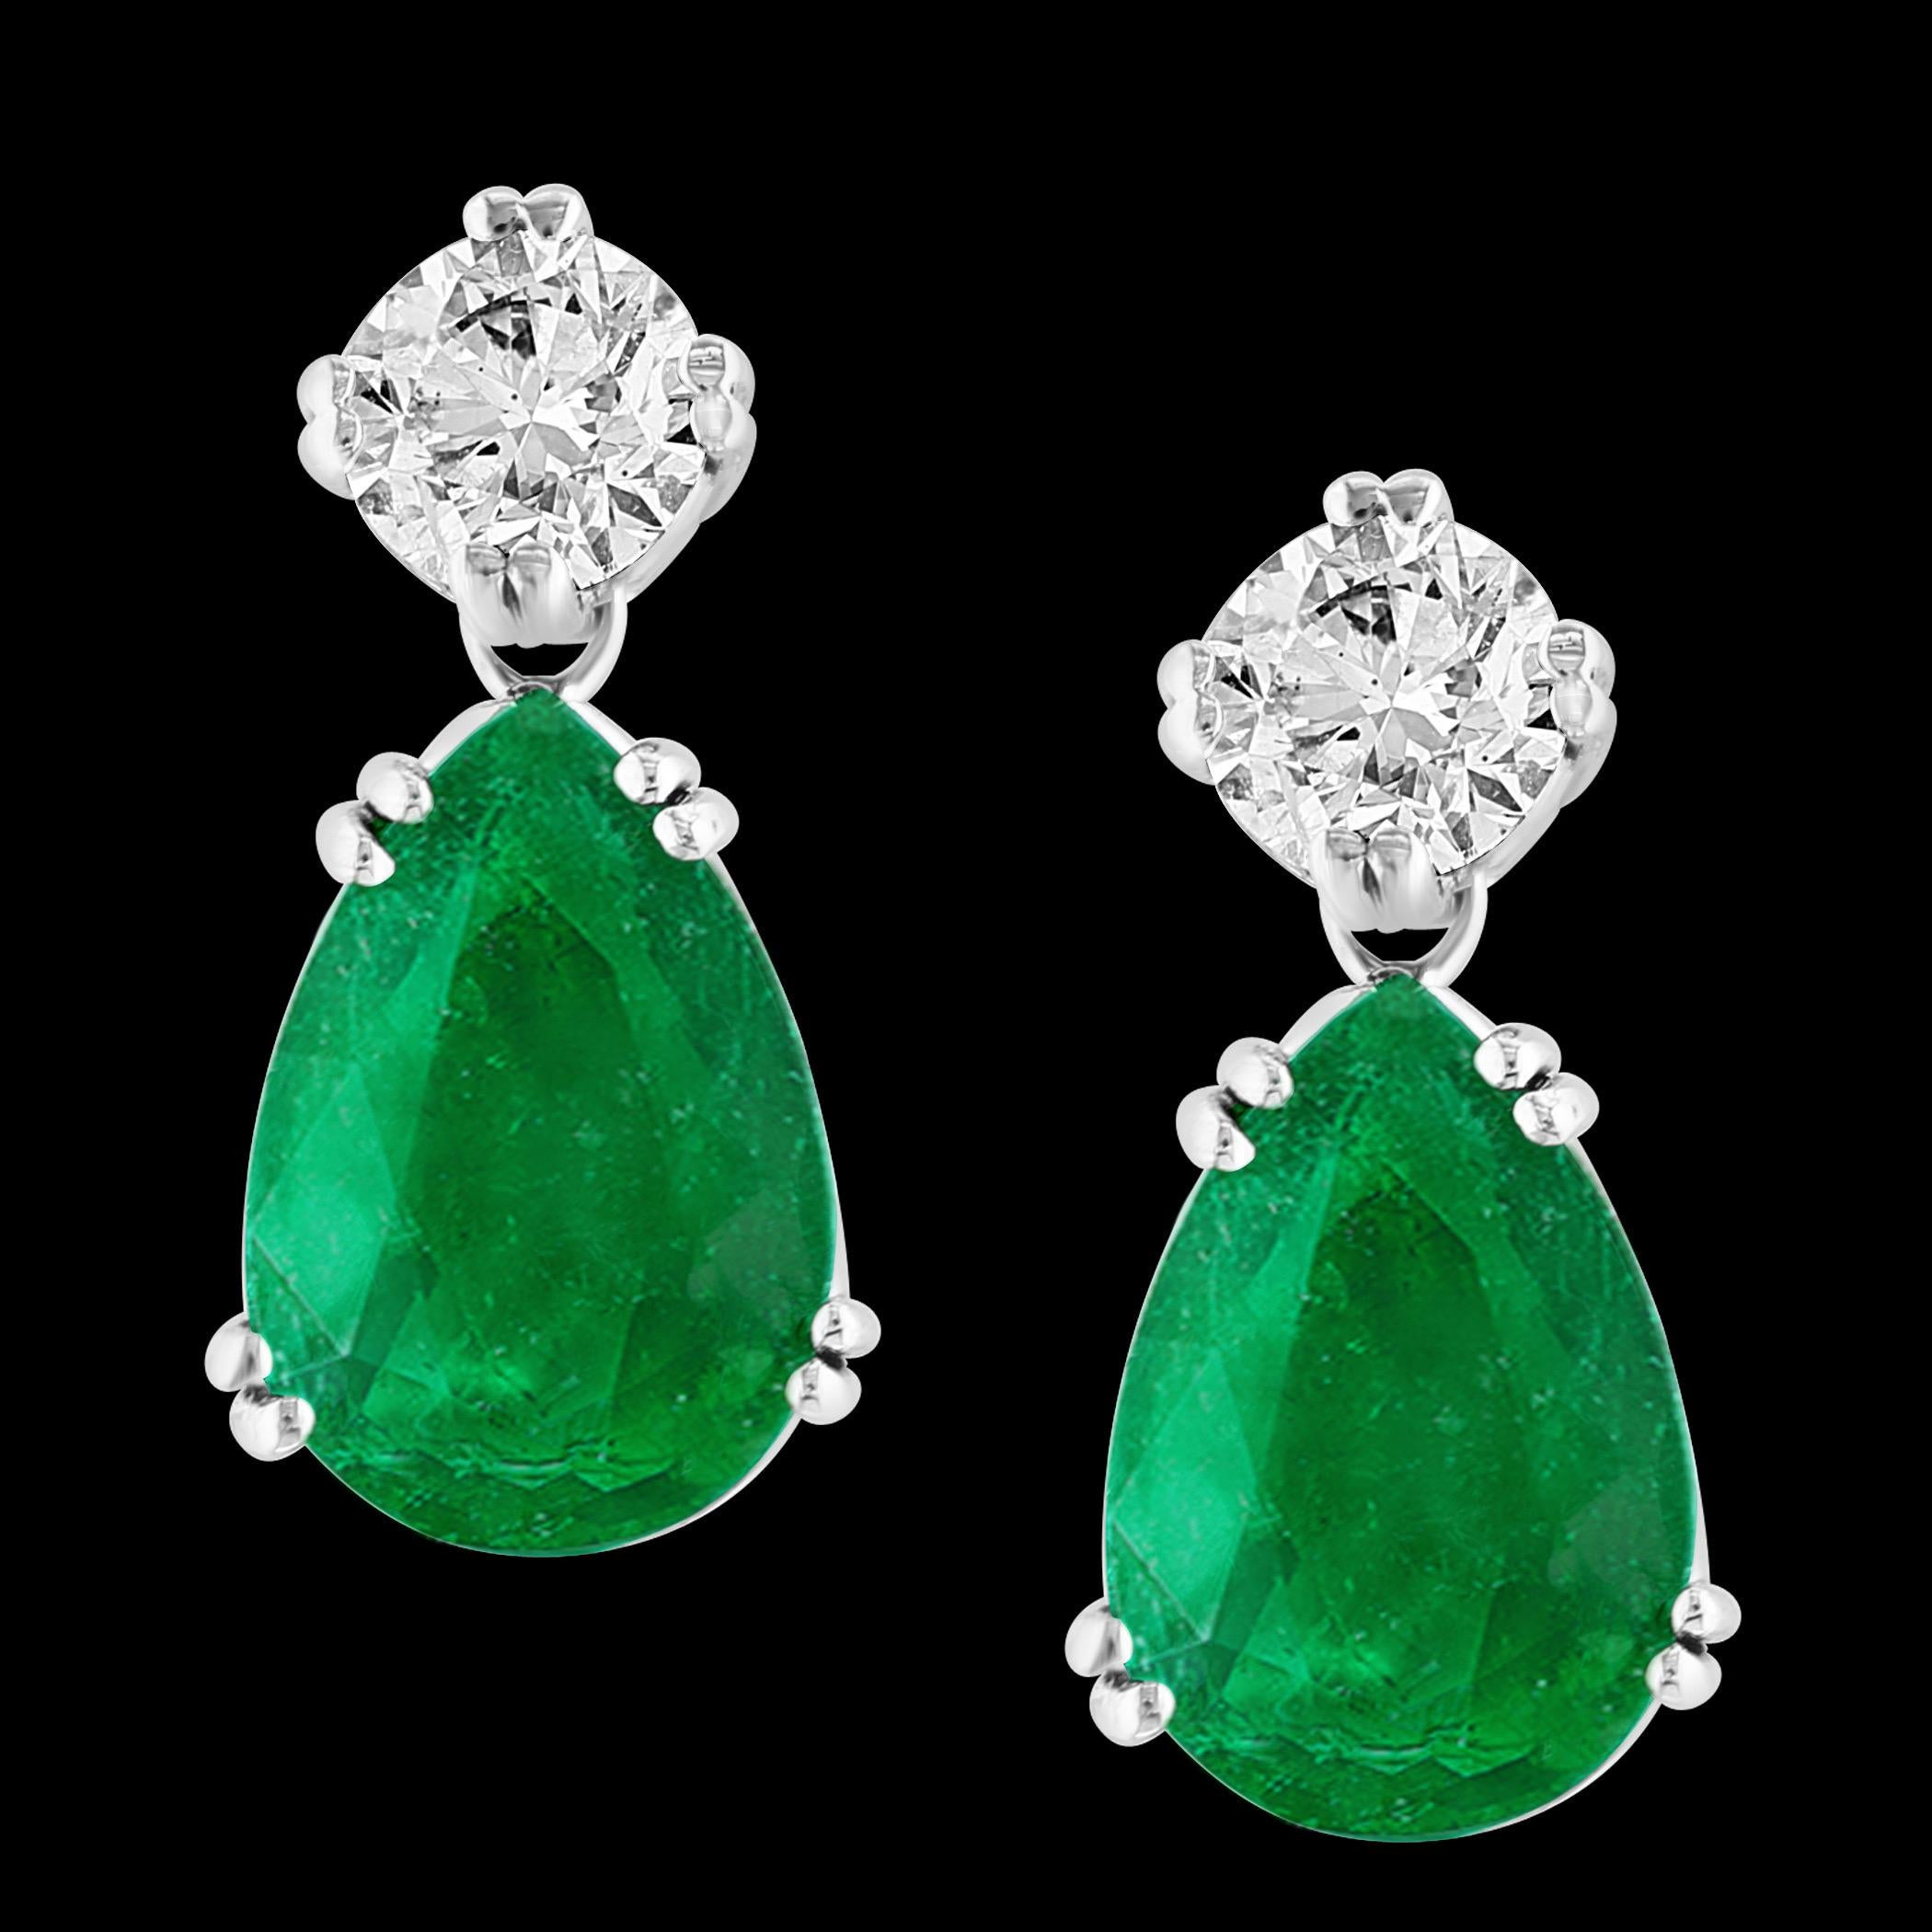 GIA Certified 11 Ct Colombian Pear Emerald Diamond  with GIA certified 1 ct each solitaire diamond Hanging/ Drop Earrings 14 karat white Gold

GIA Report # 7235032629
Natural Beryl
Origin Colombia
Clarity Enhancement F2
Color : Color: Deep  Green,